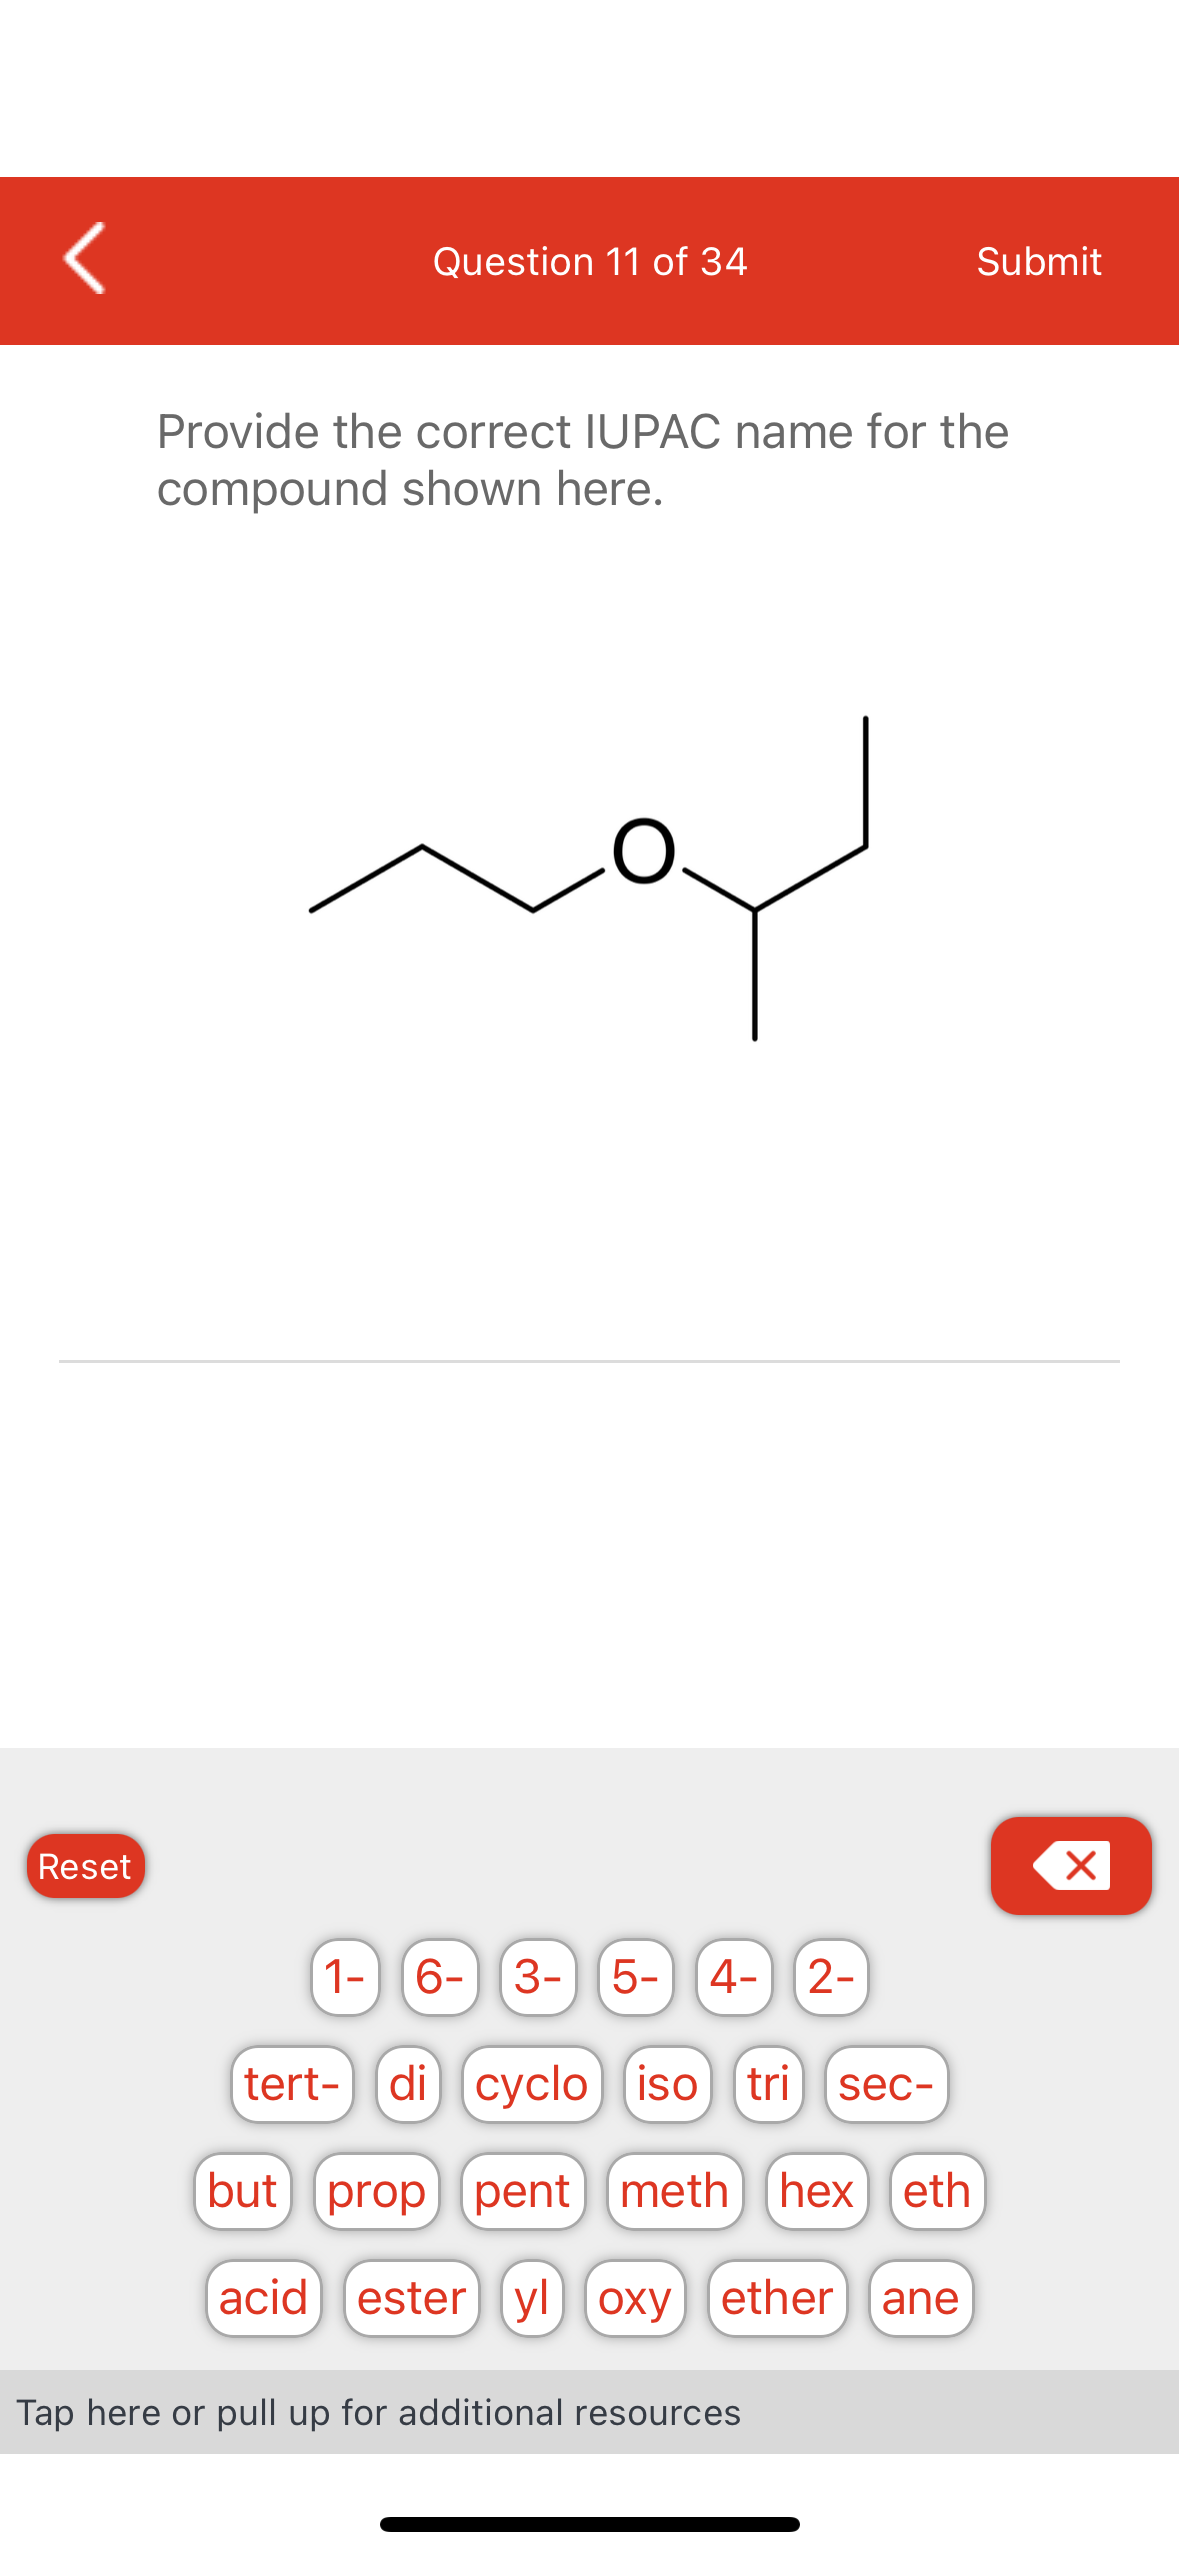 (
Reset
Question 11 of 34
Provide the correct IUPAC name for the
compound shown here.
لمه
1- 6- 3-
3- 5-
5- 4-
2-
tert-) (di) (cyclo) iso tri sec-
(but] [prop] [pent] [meth] [hex eth
acid) (ester (yl) oxy) (ether (ane
Tap here or pull up for additional resources
Submit
X x